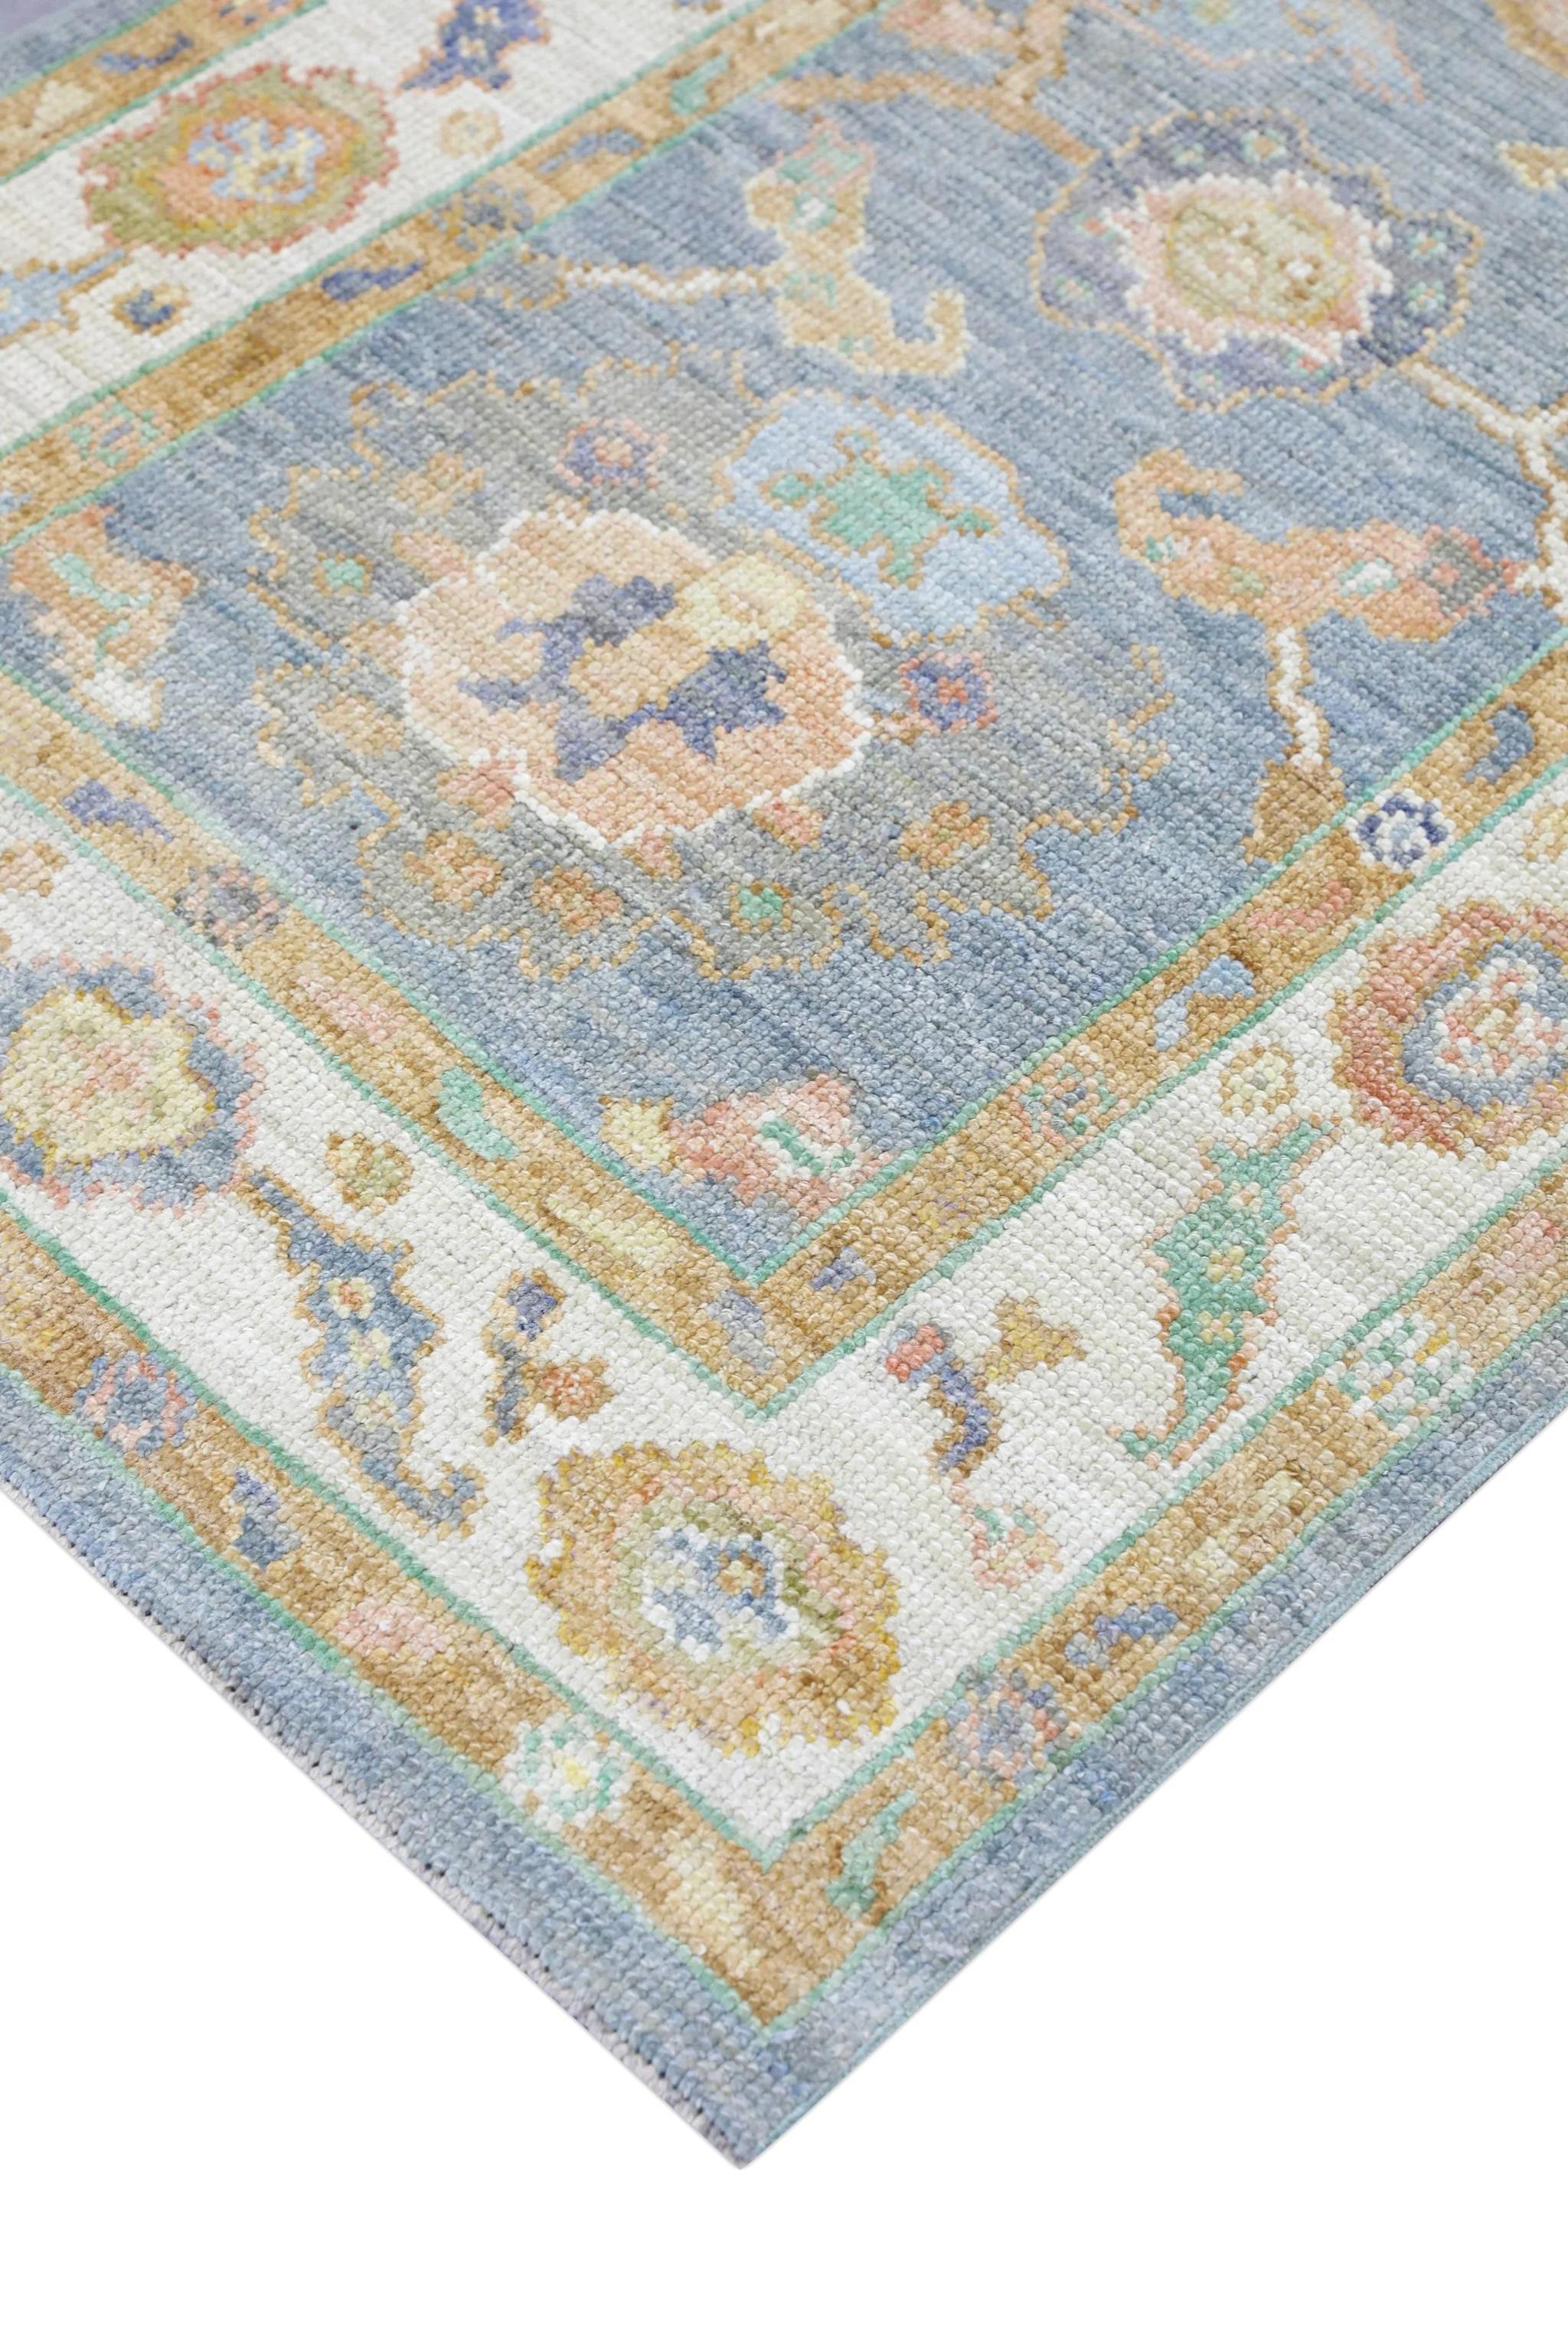 Floral Handwoven Wool Turkish Oushak Rug with Blue Field Yellow Border 2'11 X 5' For Sale 1